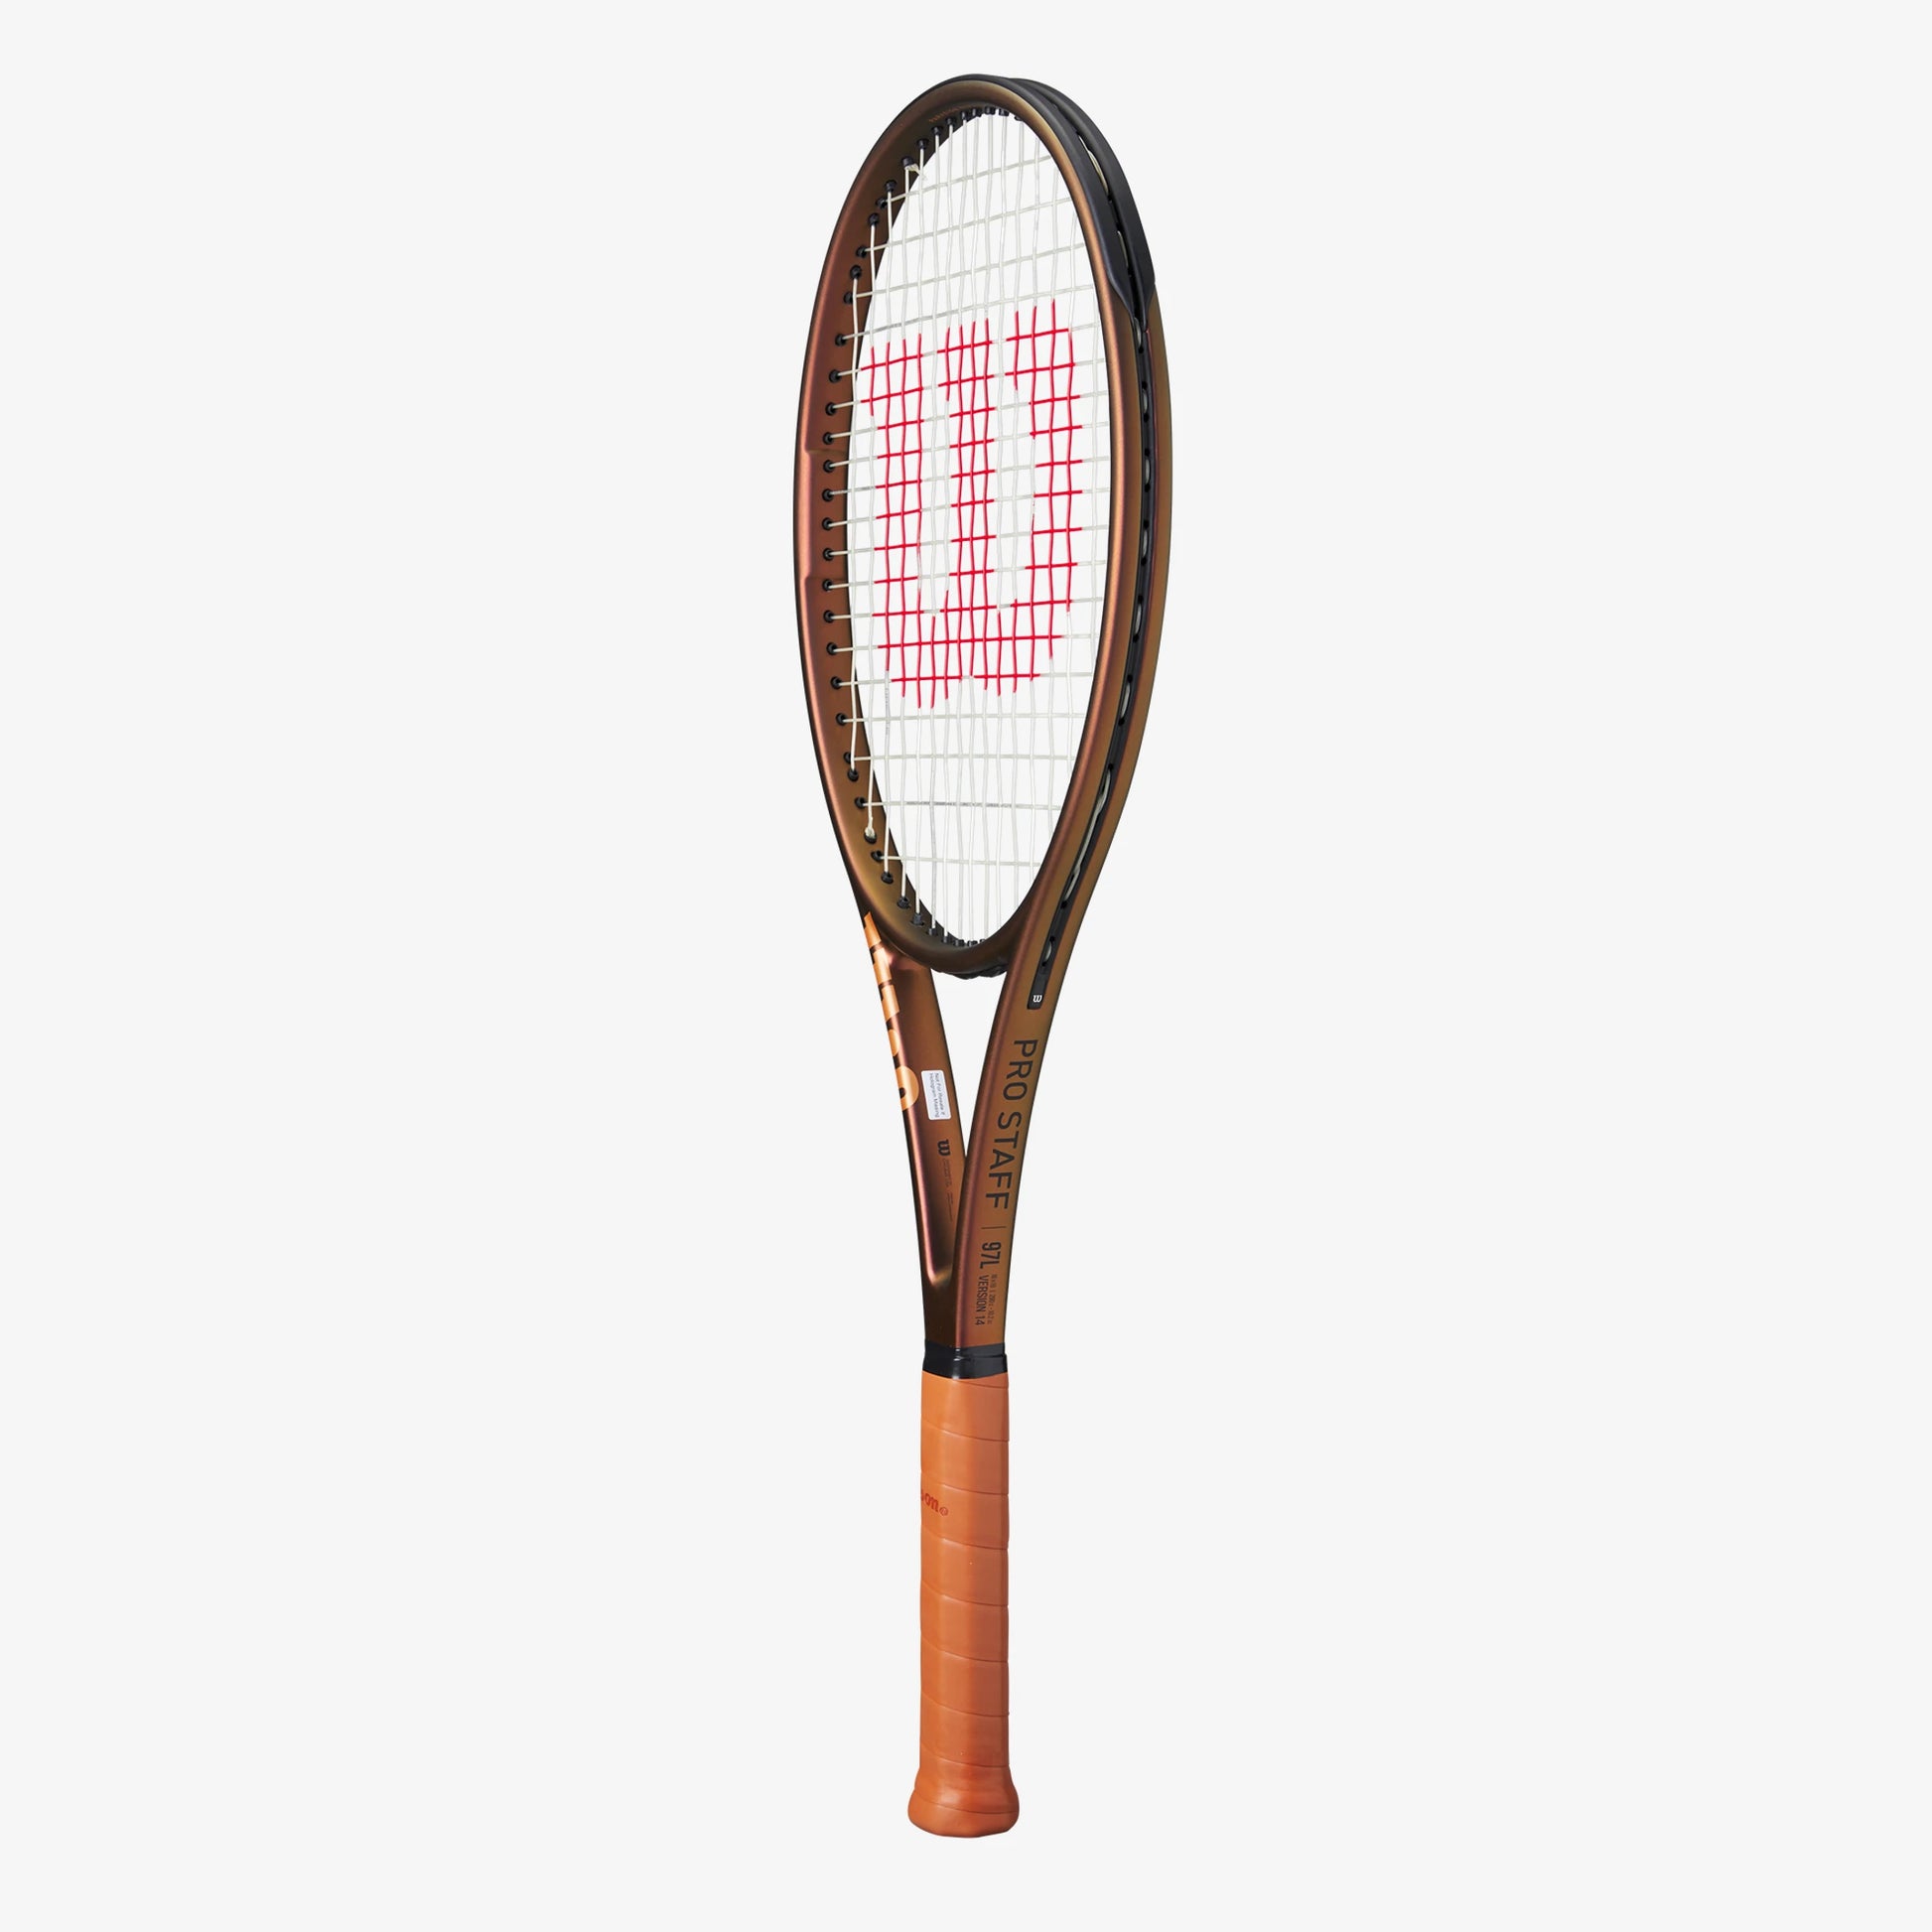 The Wilson Pro Staff 97L Version 14 Tennis Racket available for sale at GSM Sports.     